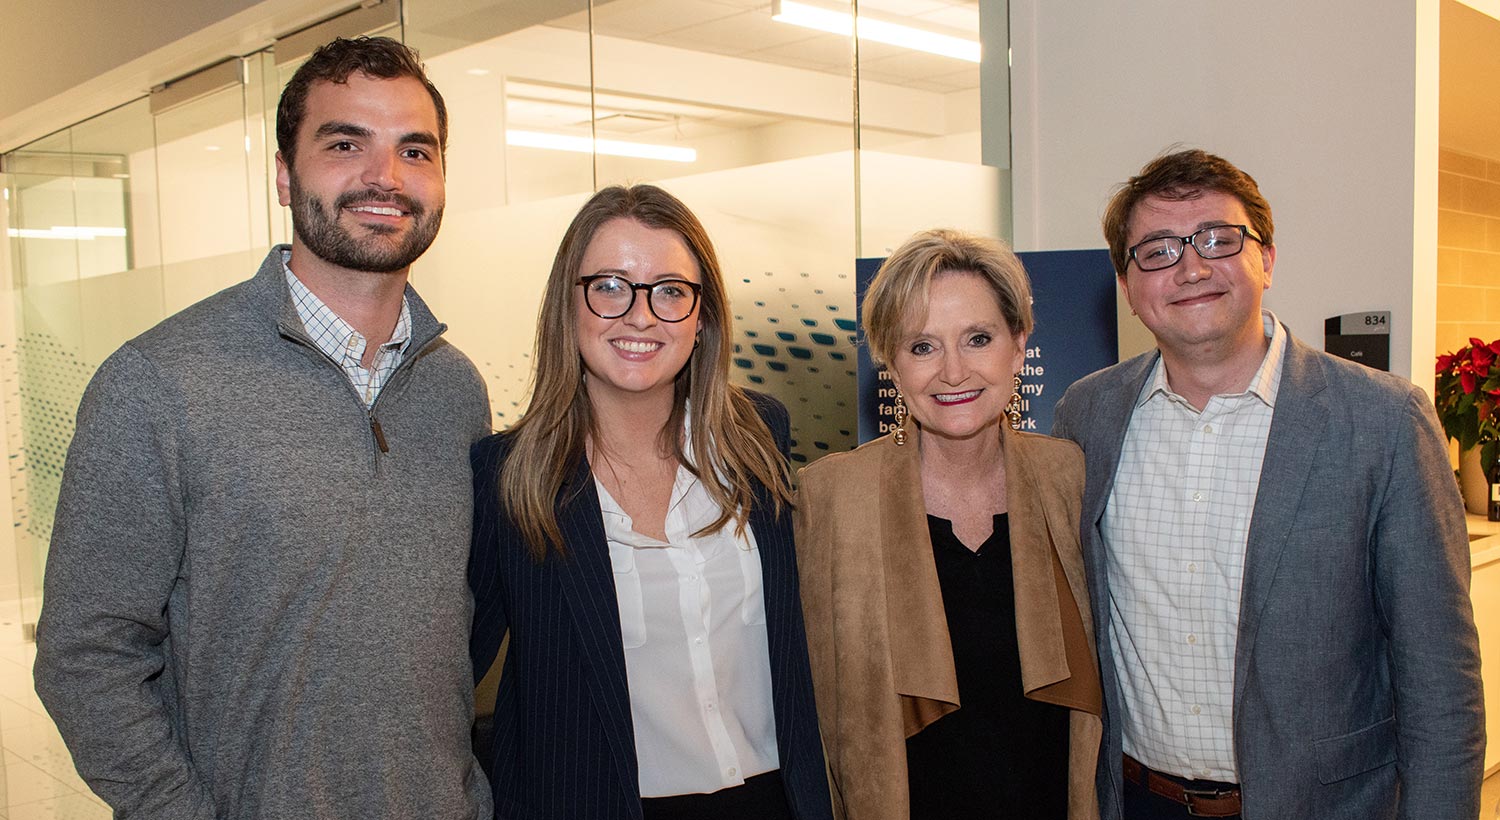 Senator Hyde-Smith joins fellow Mississippians at a Mississippi Society of Washington, D.C., "welcome back" event